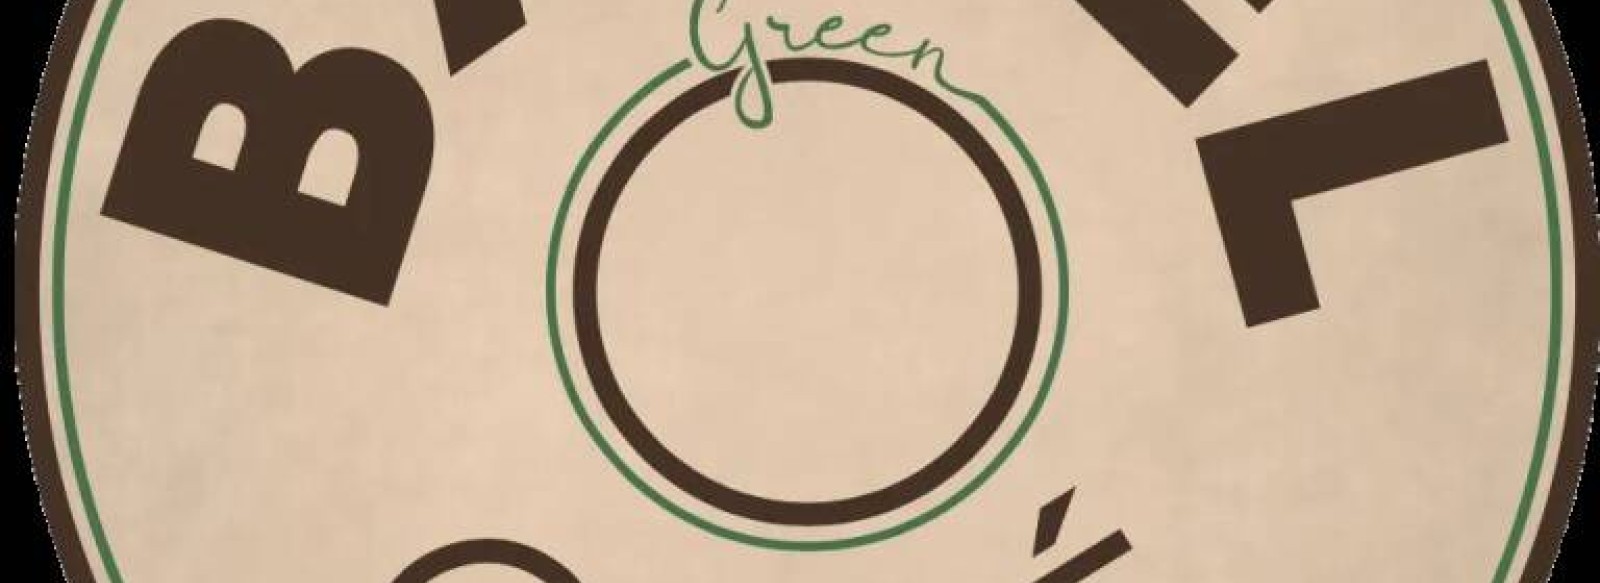 Green Bagel Cafe Angers